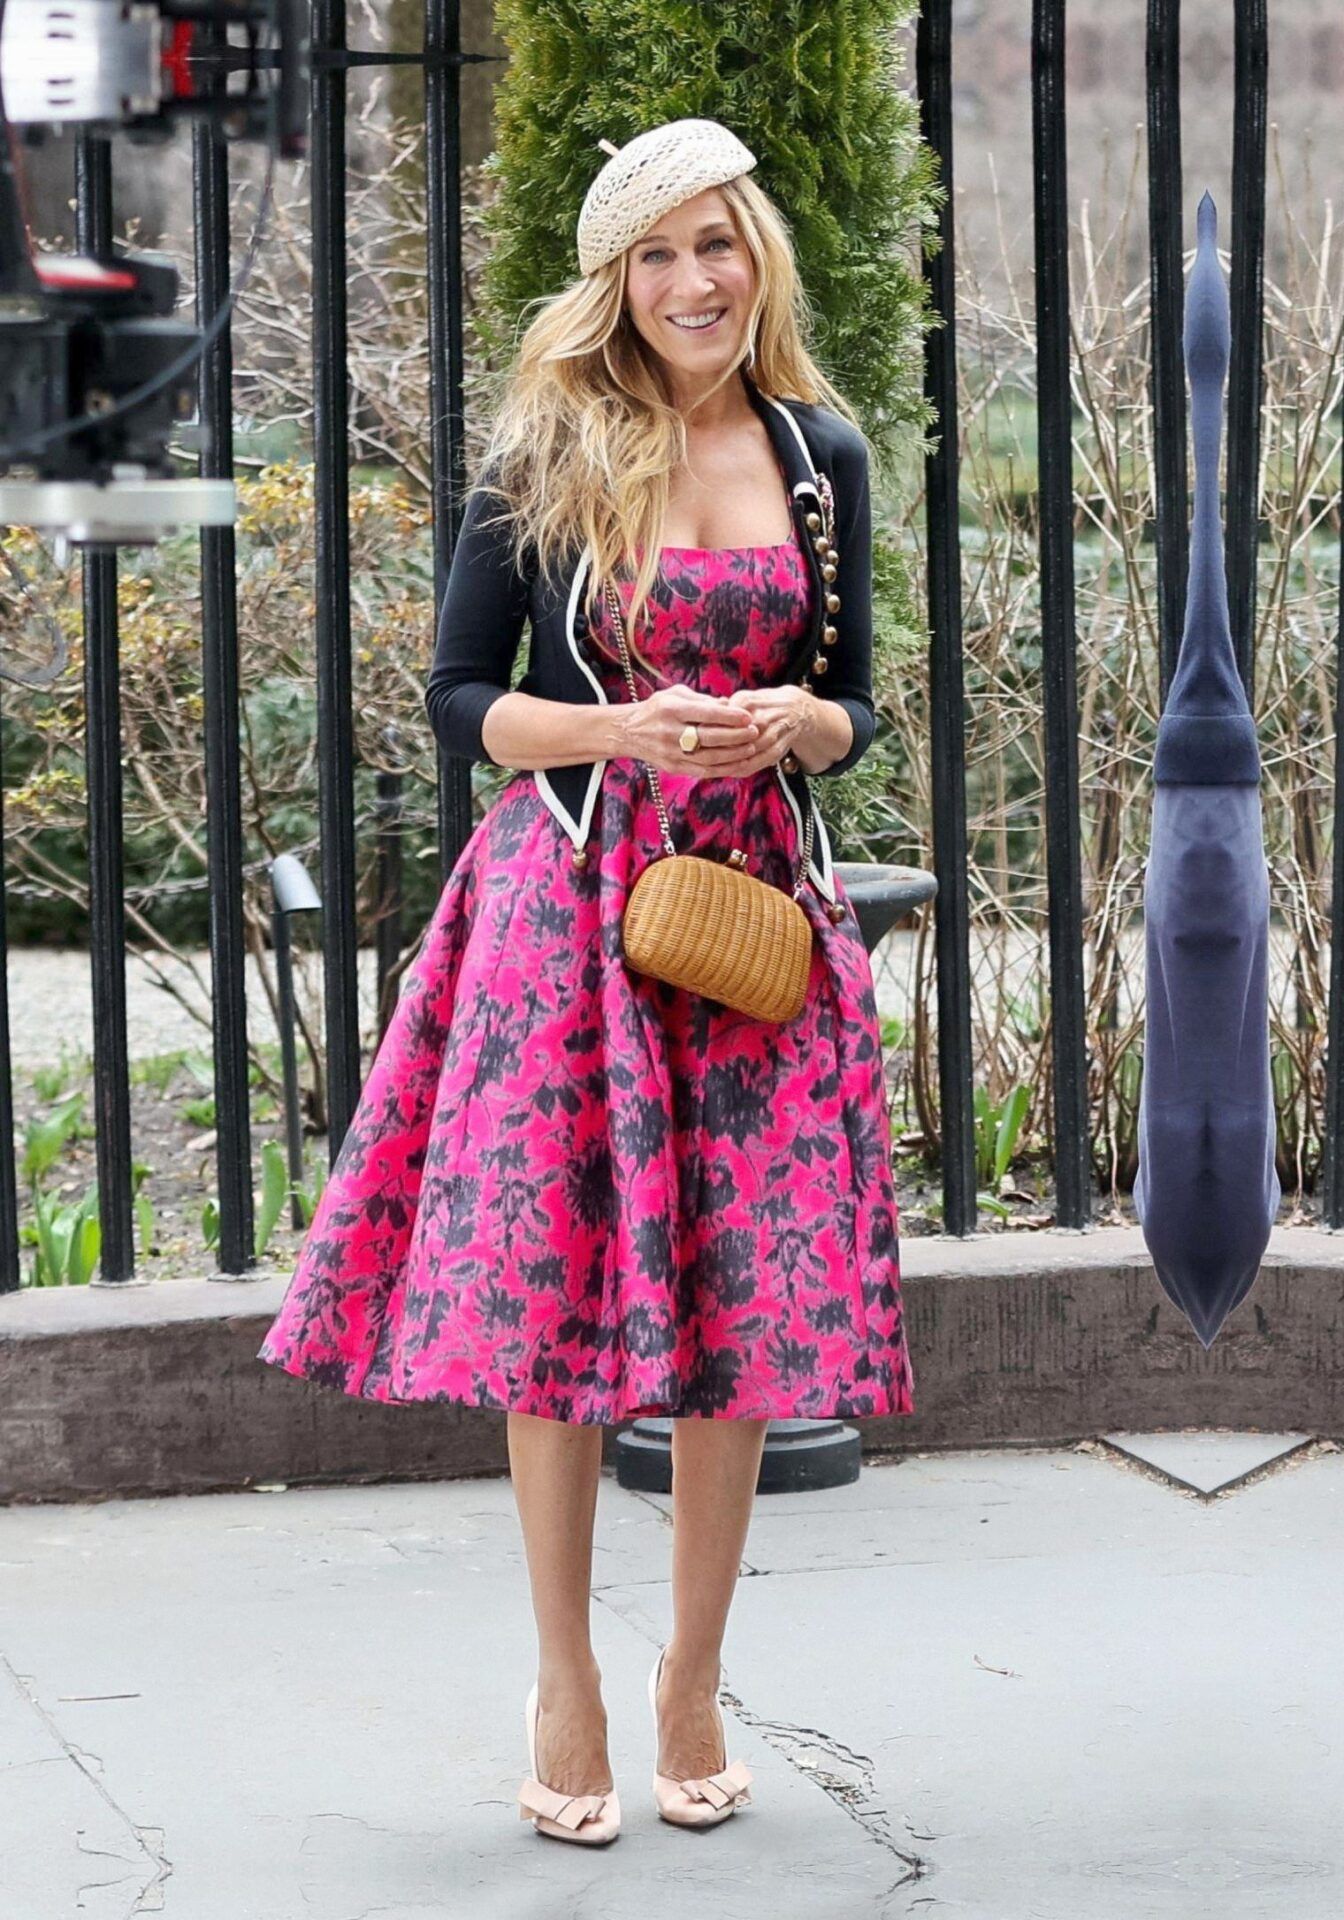 Sarah Jessica Parker – New York, NY | Filming “And Just Like That”